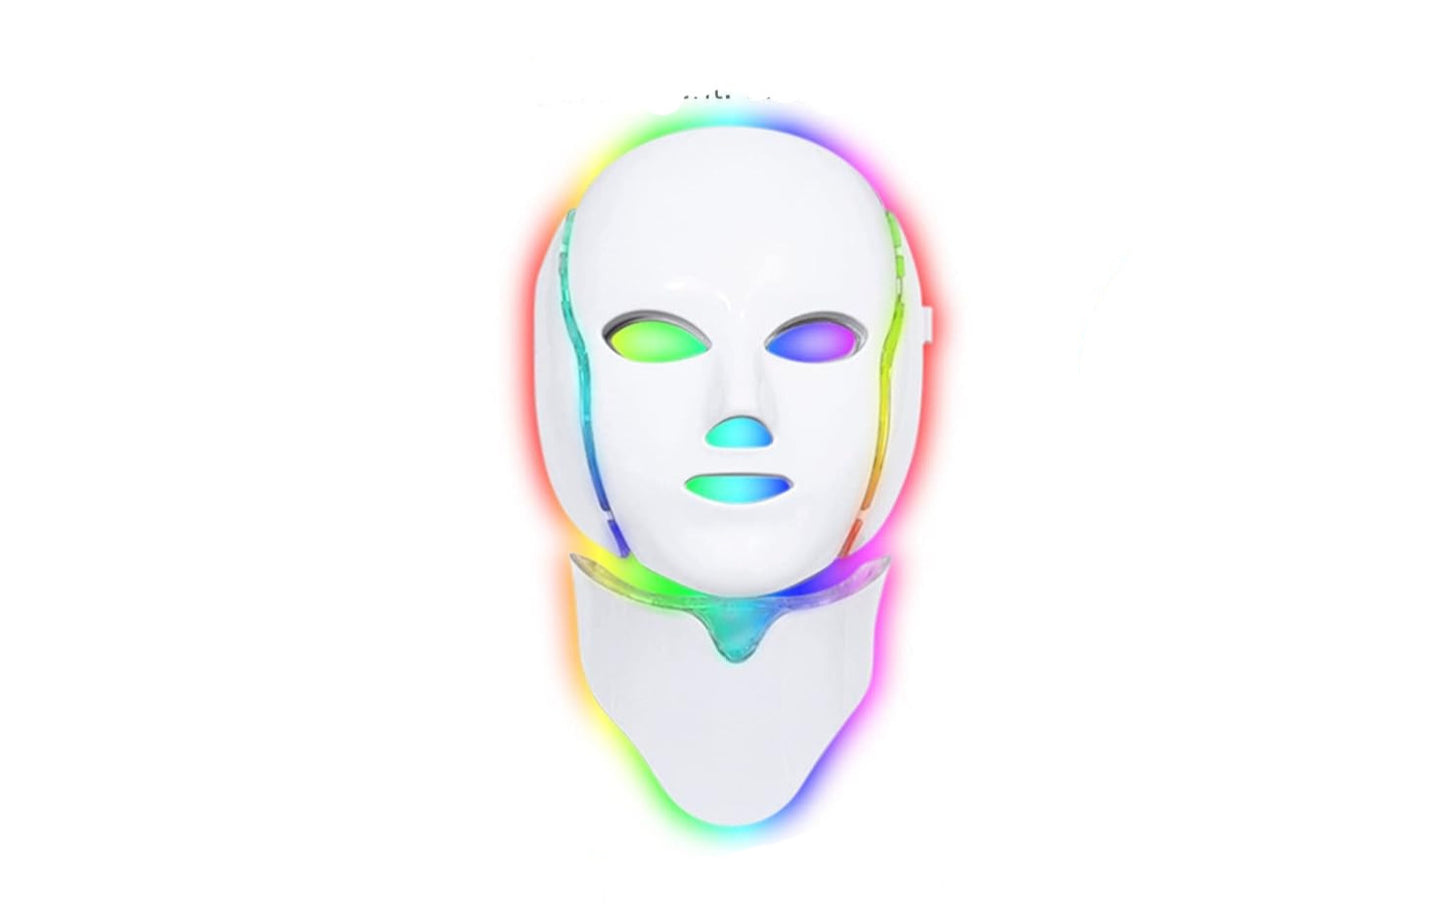 LED Light facial therapy mask-LED light mask for beauty therapy